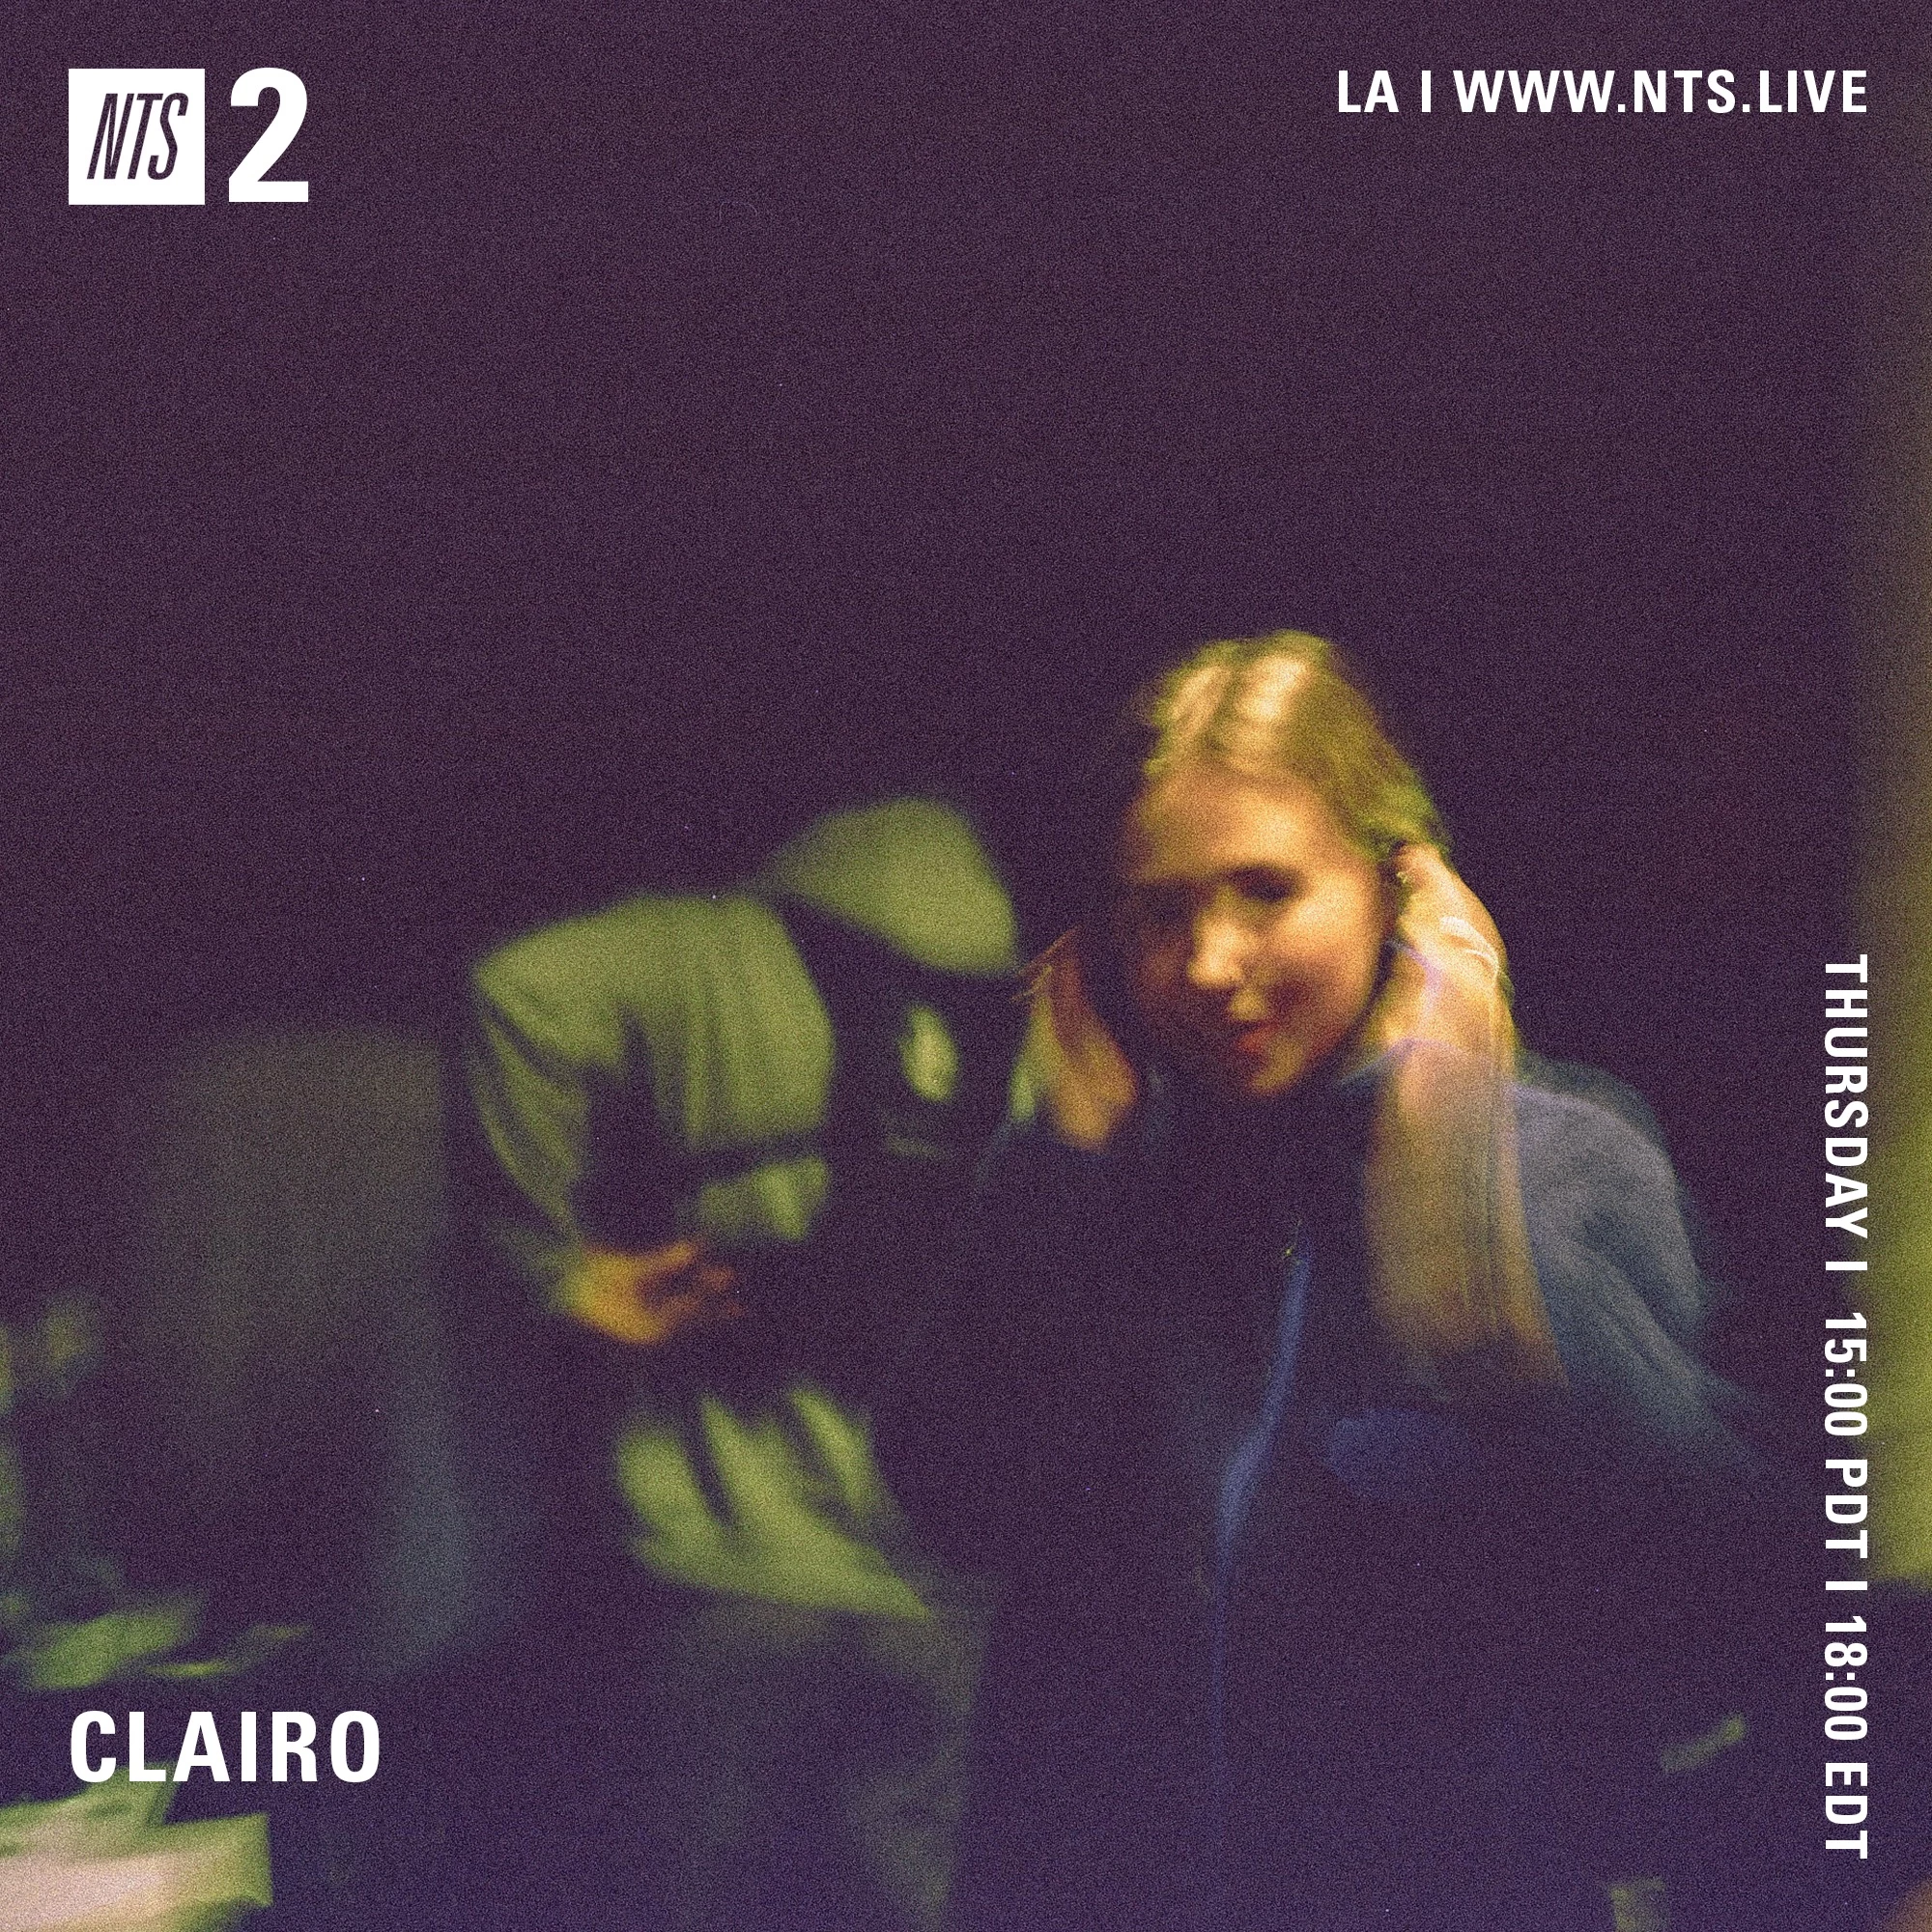 listen to the first episode of Clairo's NTS Radio show